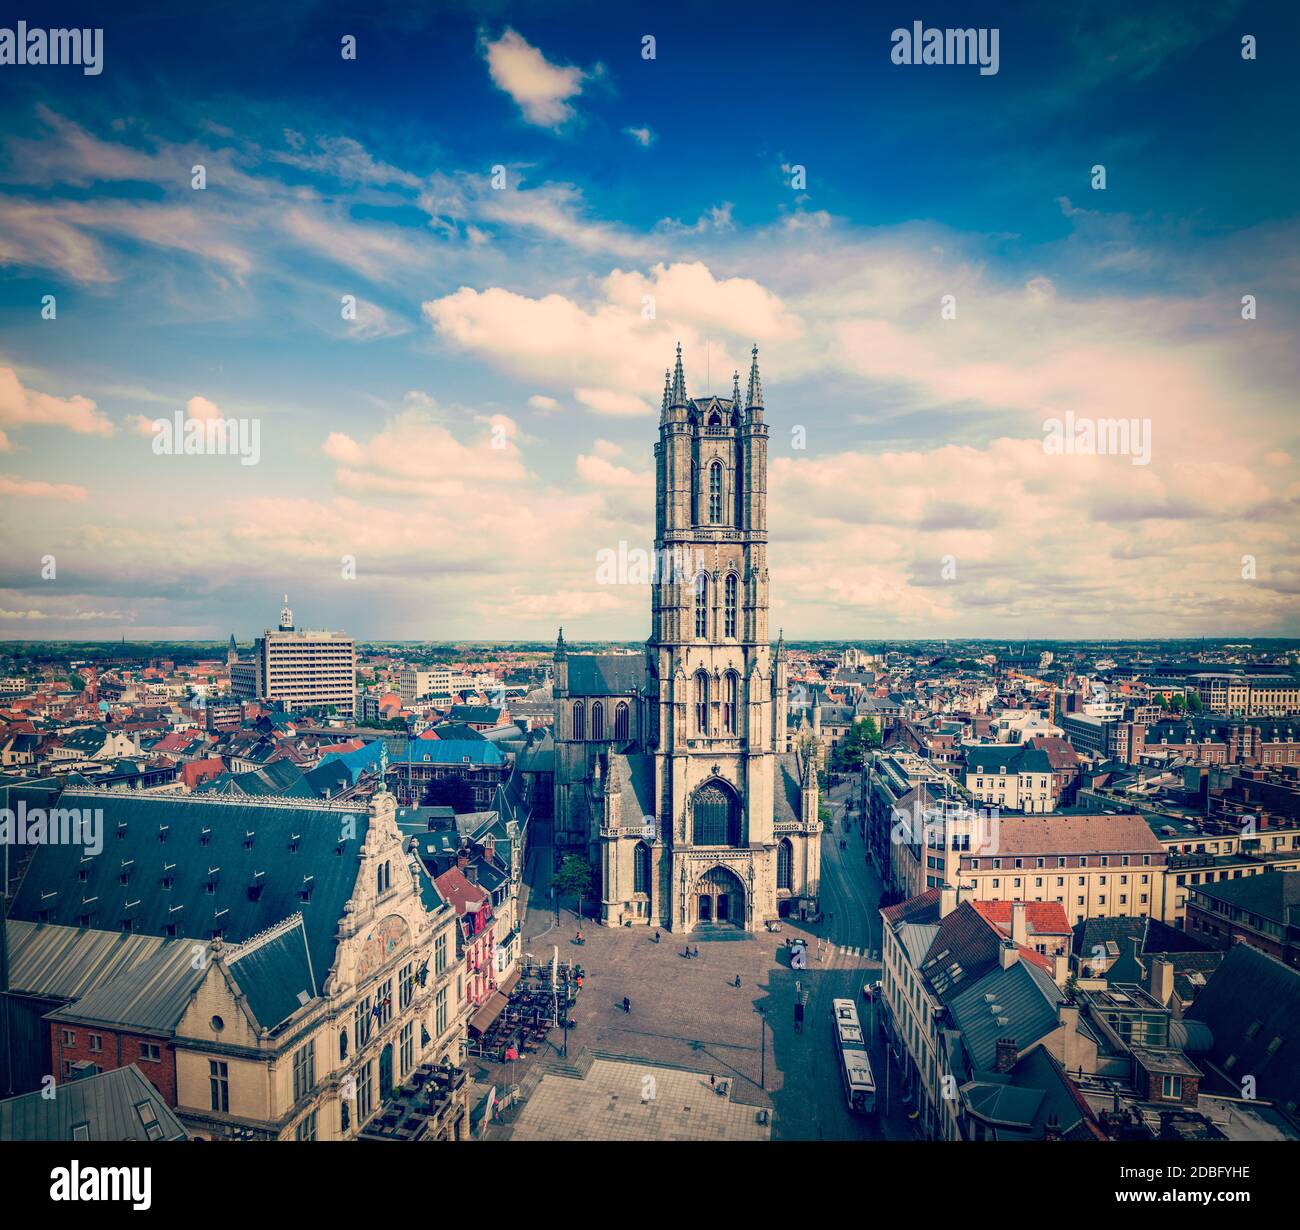 Vintage retro hipster style travel image of Saint Bavo Cathedral (Sint-Baafskathedraal) and Sint-Baafsplein, view from Belfry. Ghent, Belgium Stock Photo